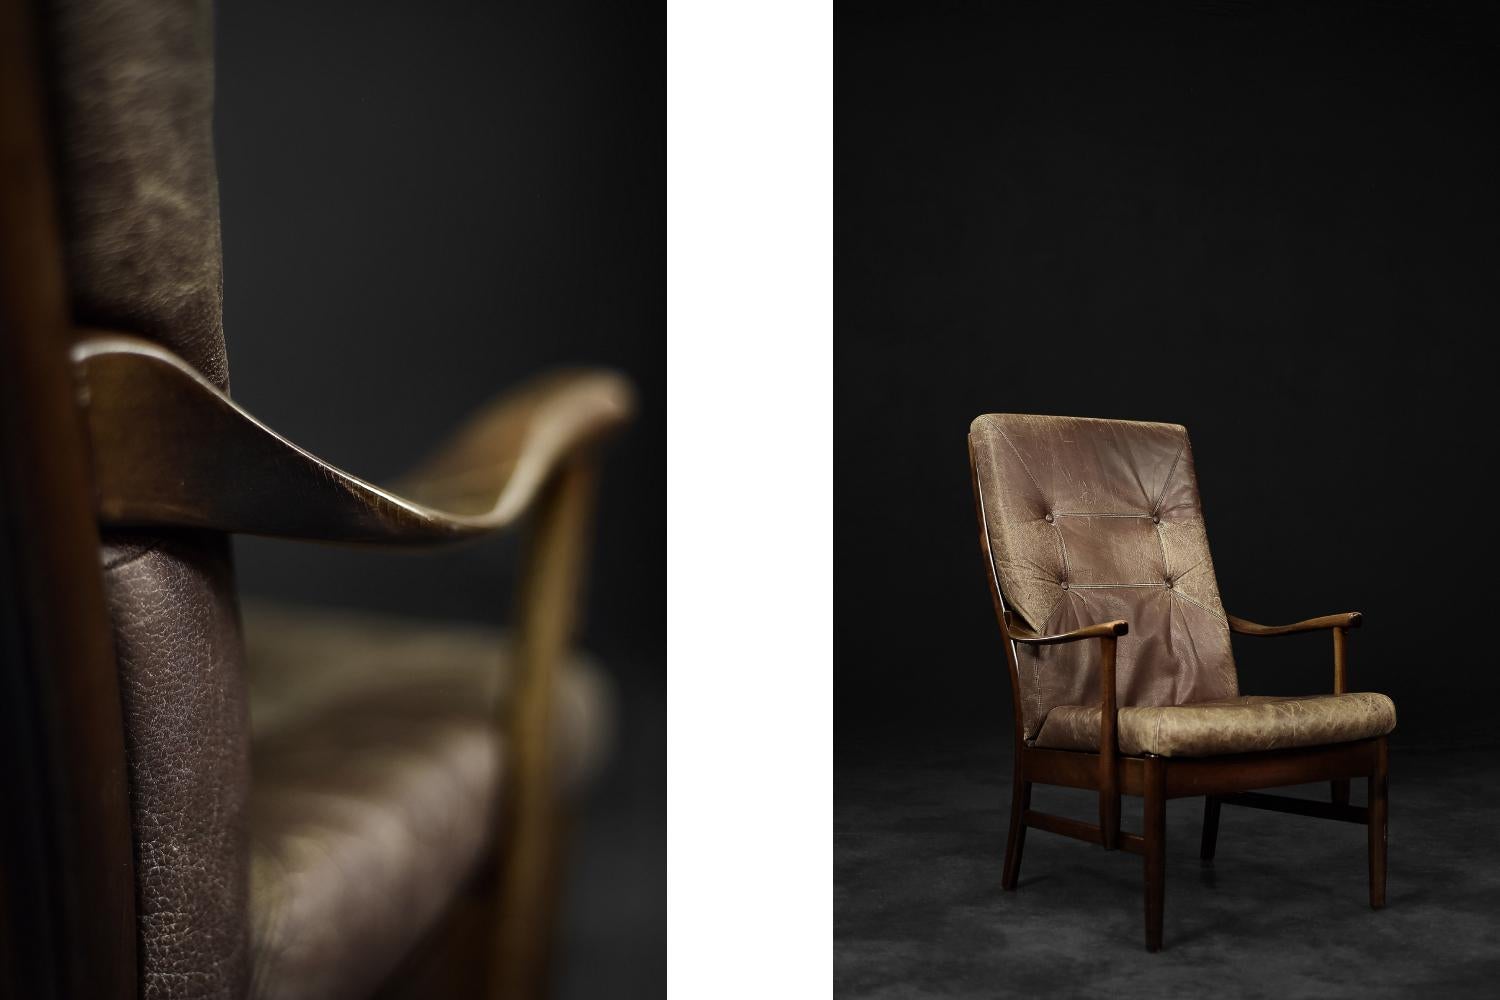 This high armchair was produced by the Danish manufactory Farstrup Møbler during the 1970s. The frame is made of solid beech wood in a dark shade of dark chocolate. The seat and backrest cushion is upholstered in high-quality dark brown natural